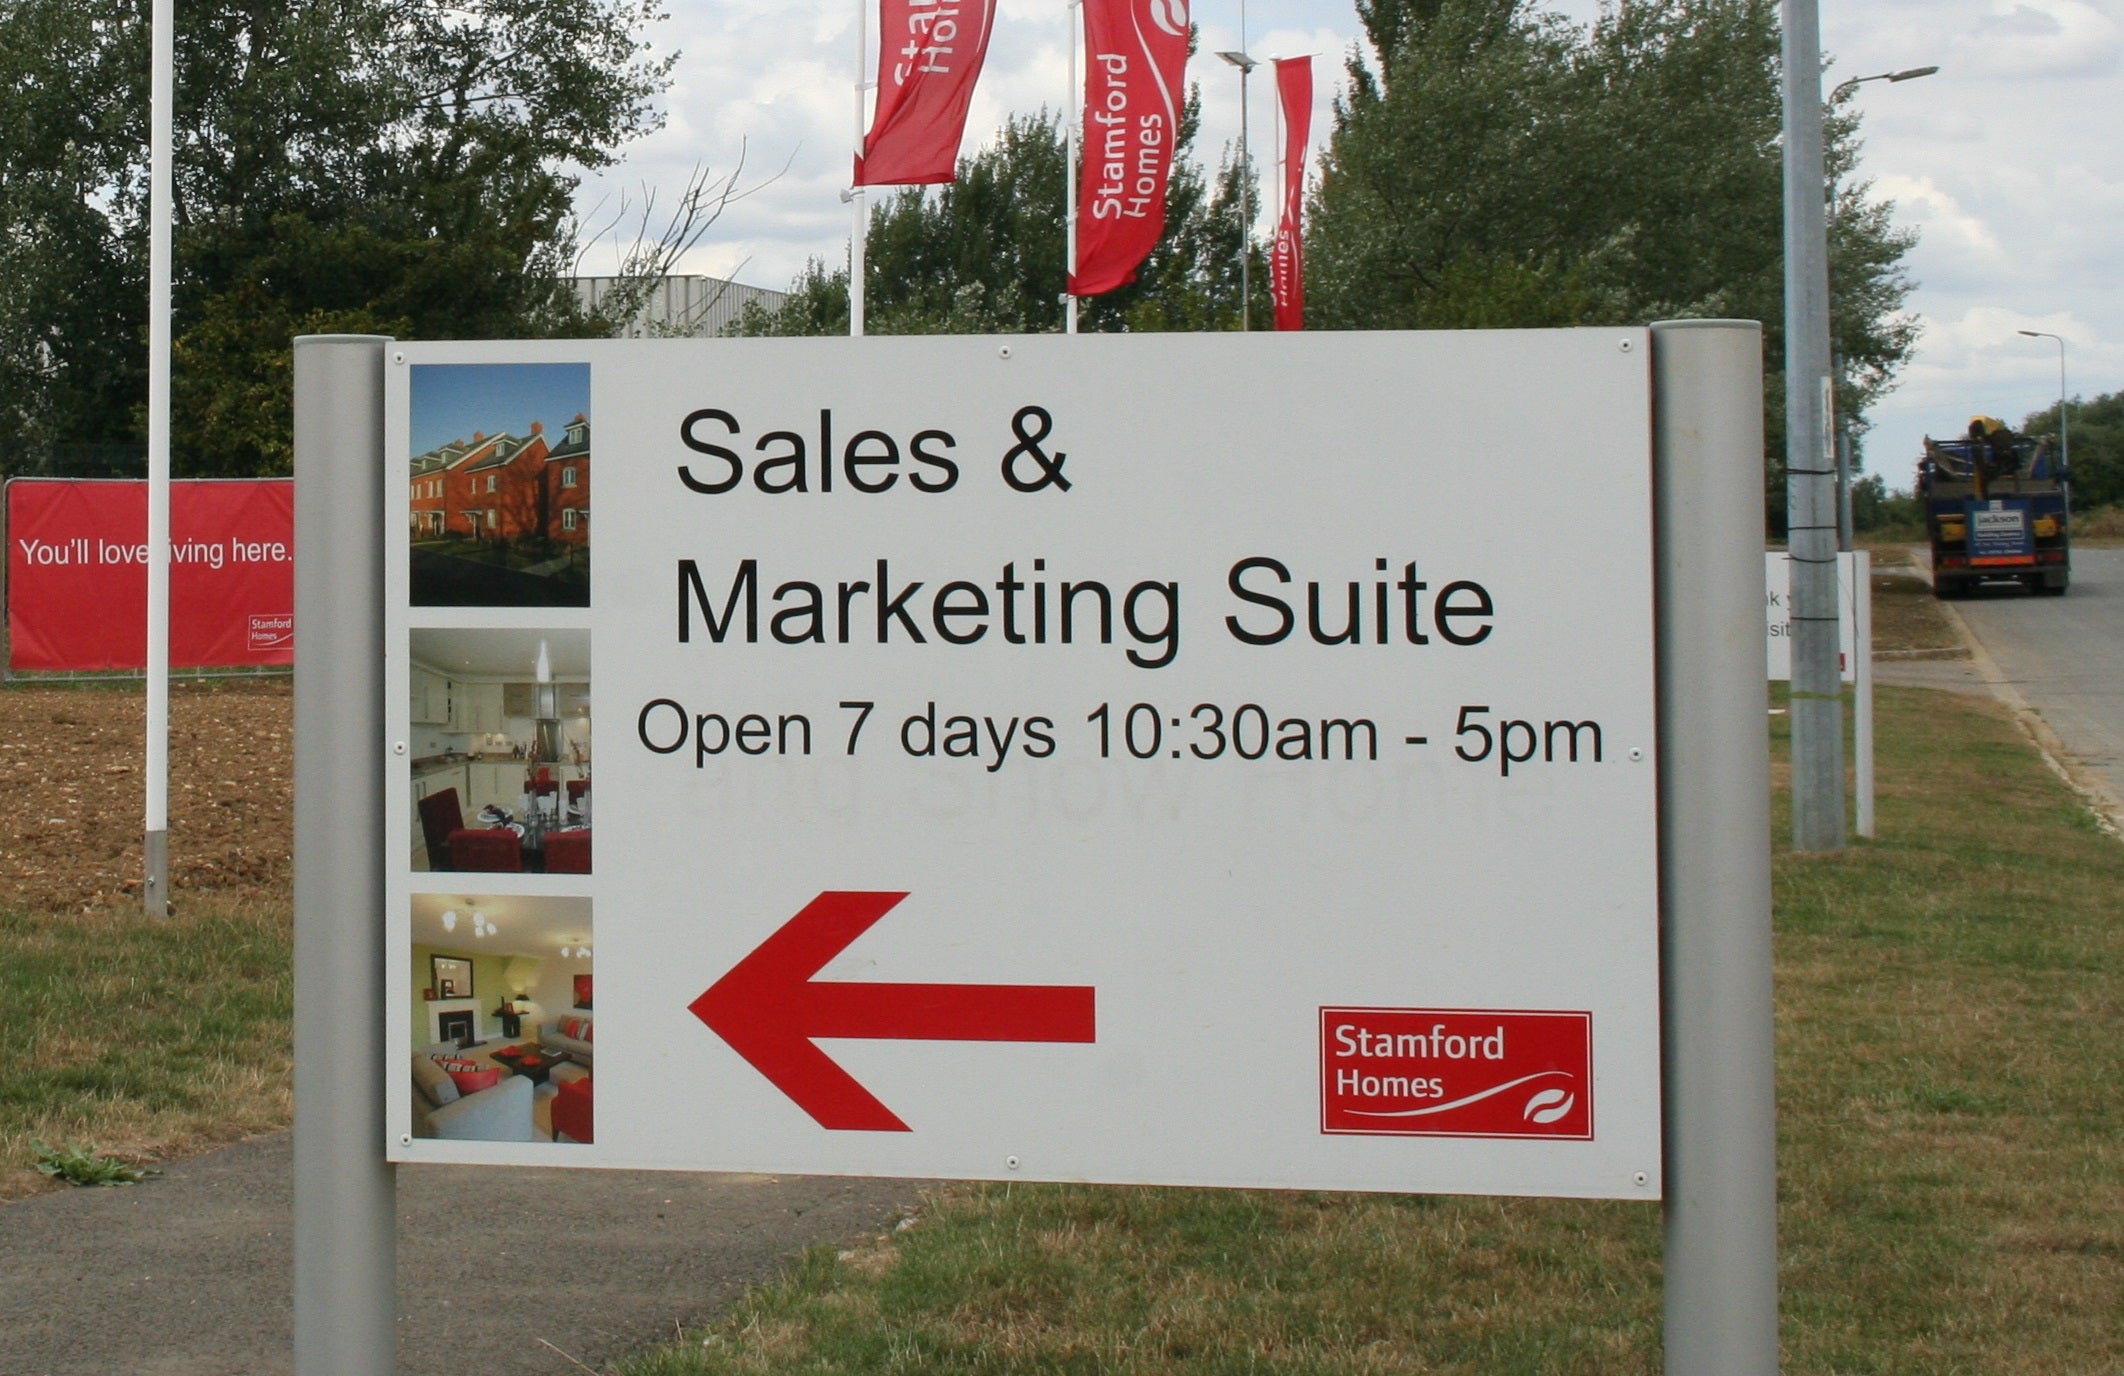 Professional Corrugated Plastic Event Signs - Customizable, Double-Sided, Available in 4mm and 10mm Sizes